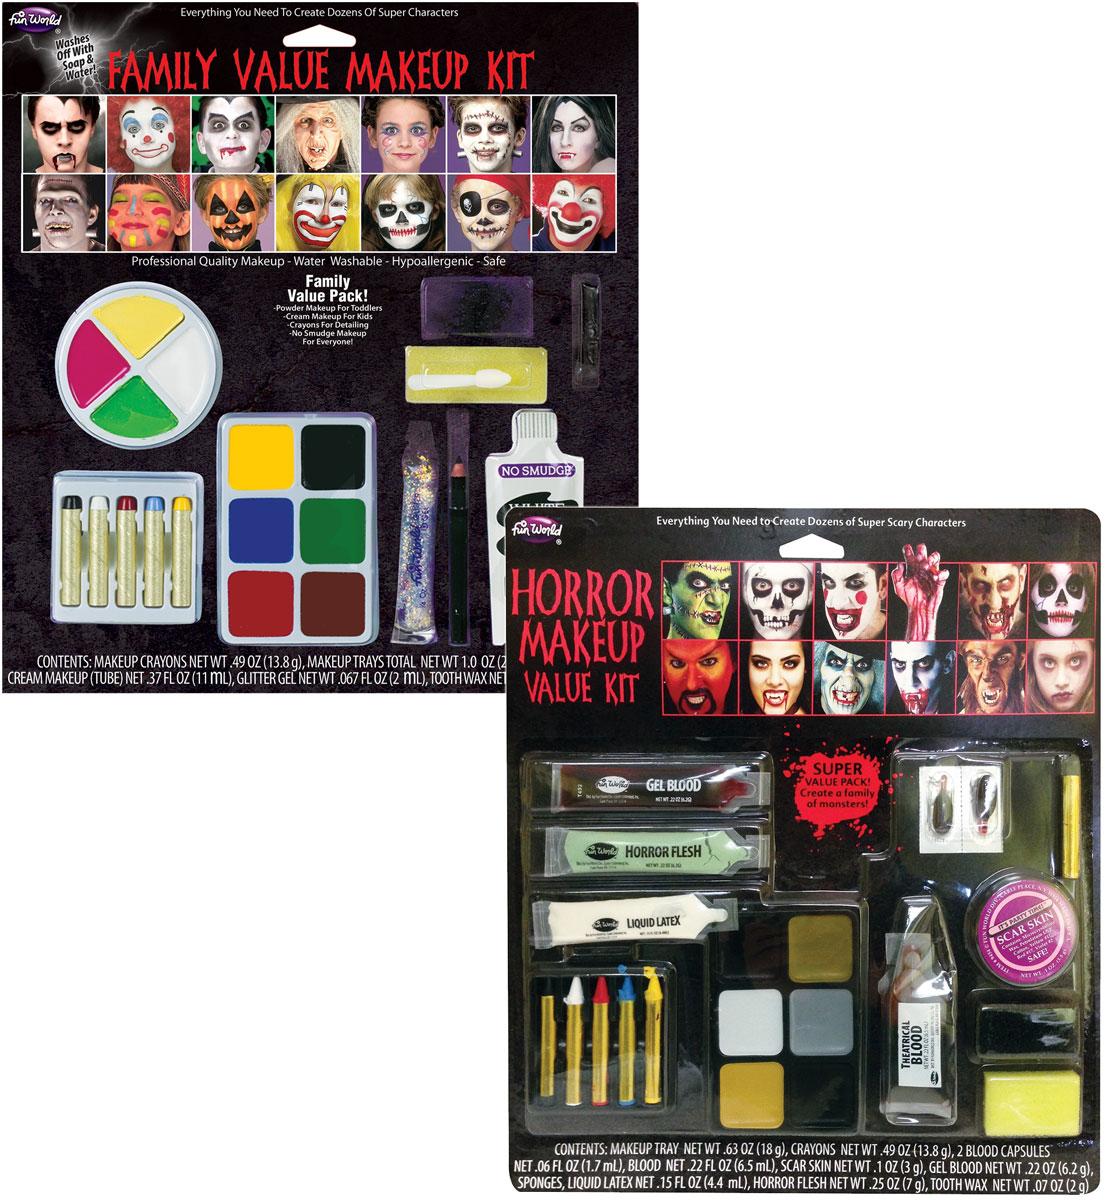 Value Family Makeup Sets by Fun-World 9543 available in either Festive/General or Horror options